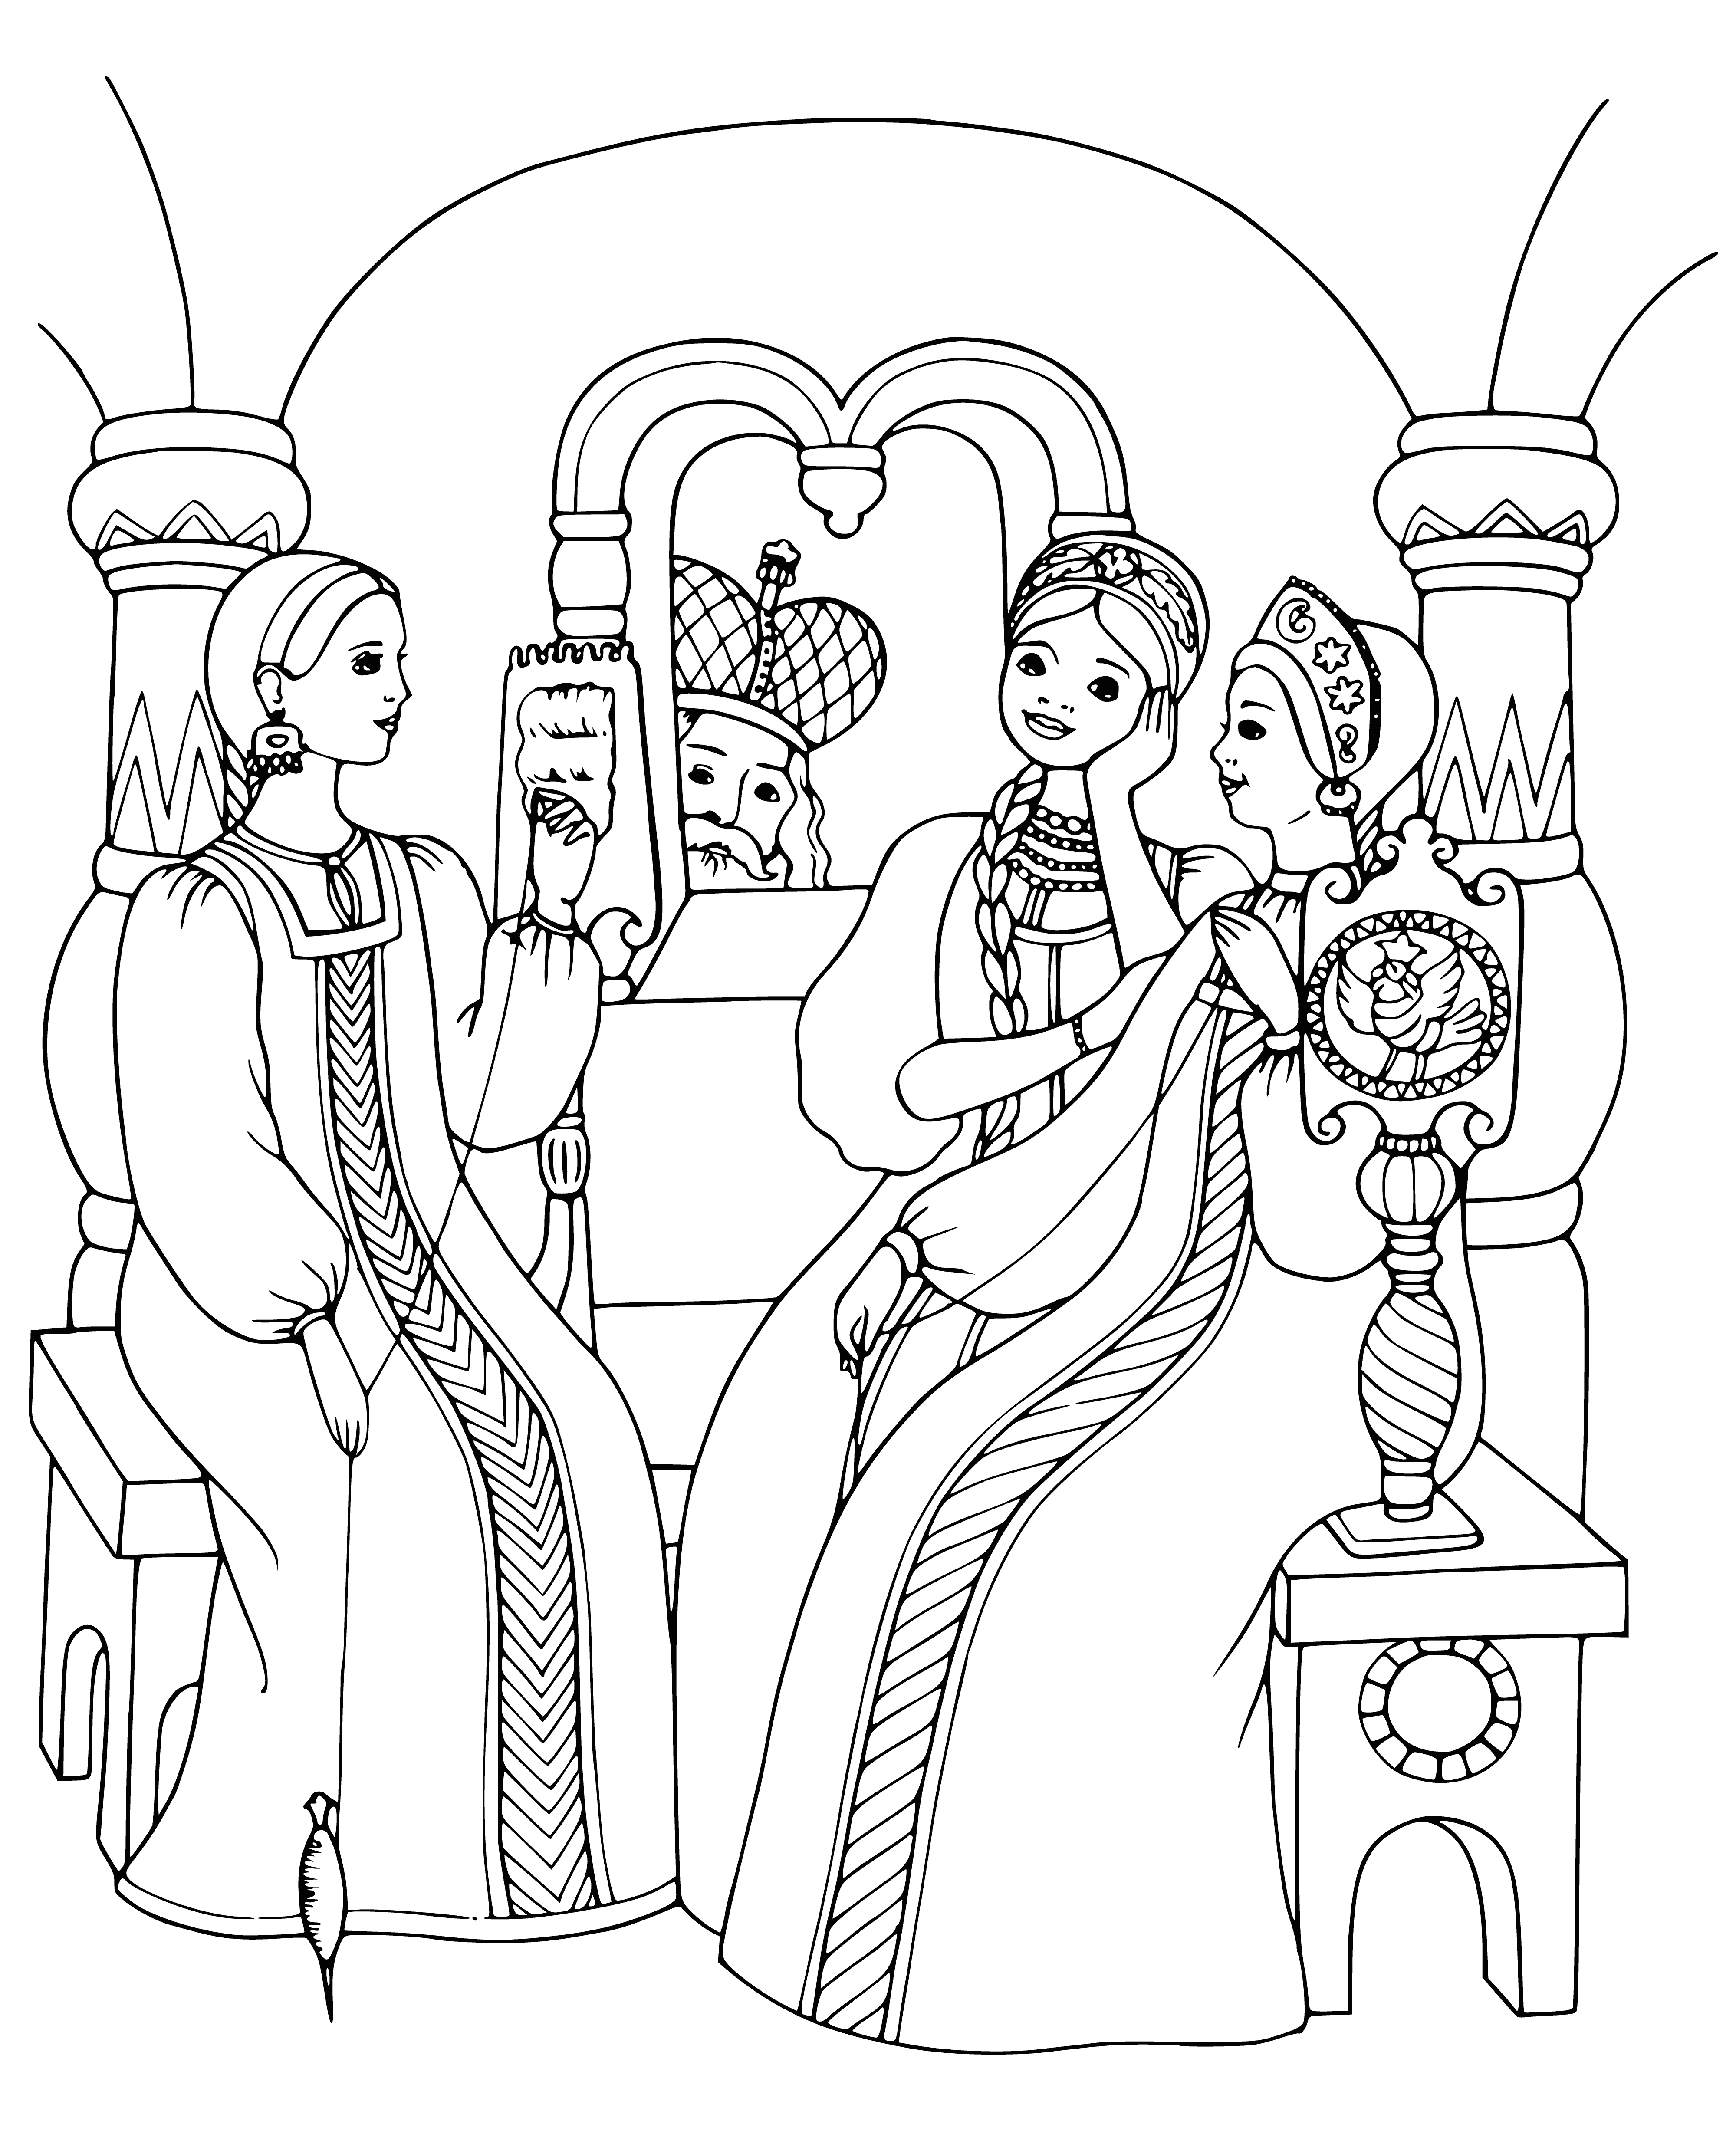 Three maidens by the window coloring page